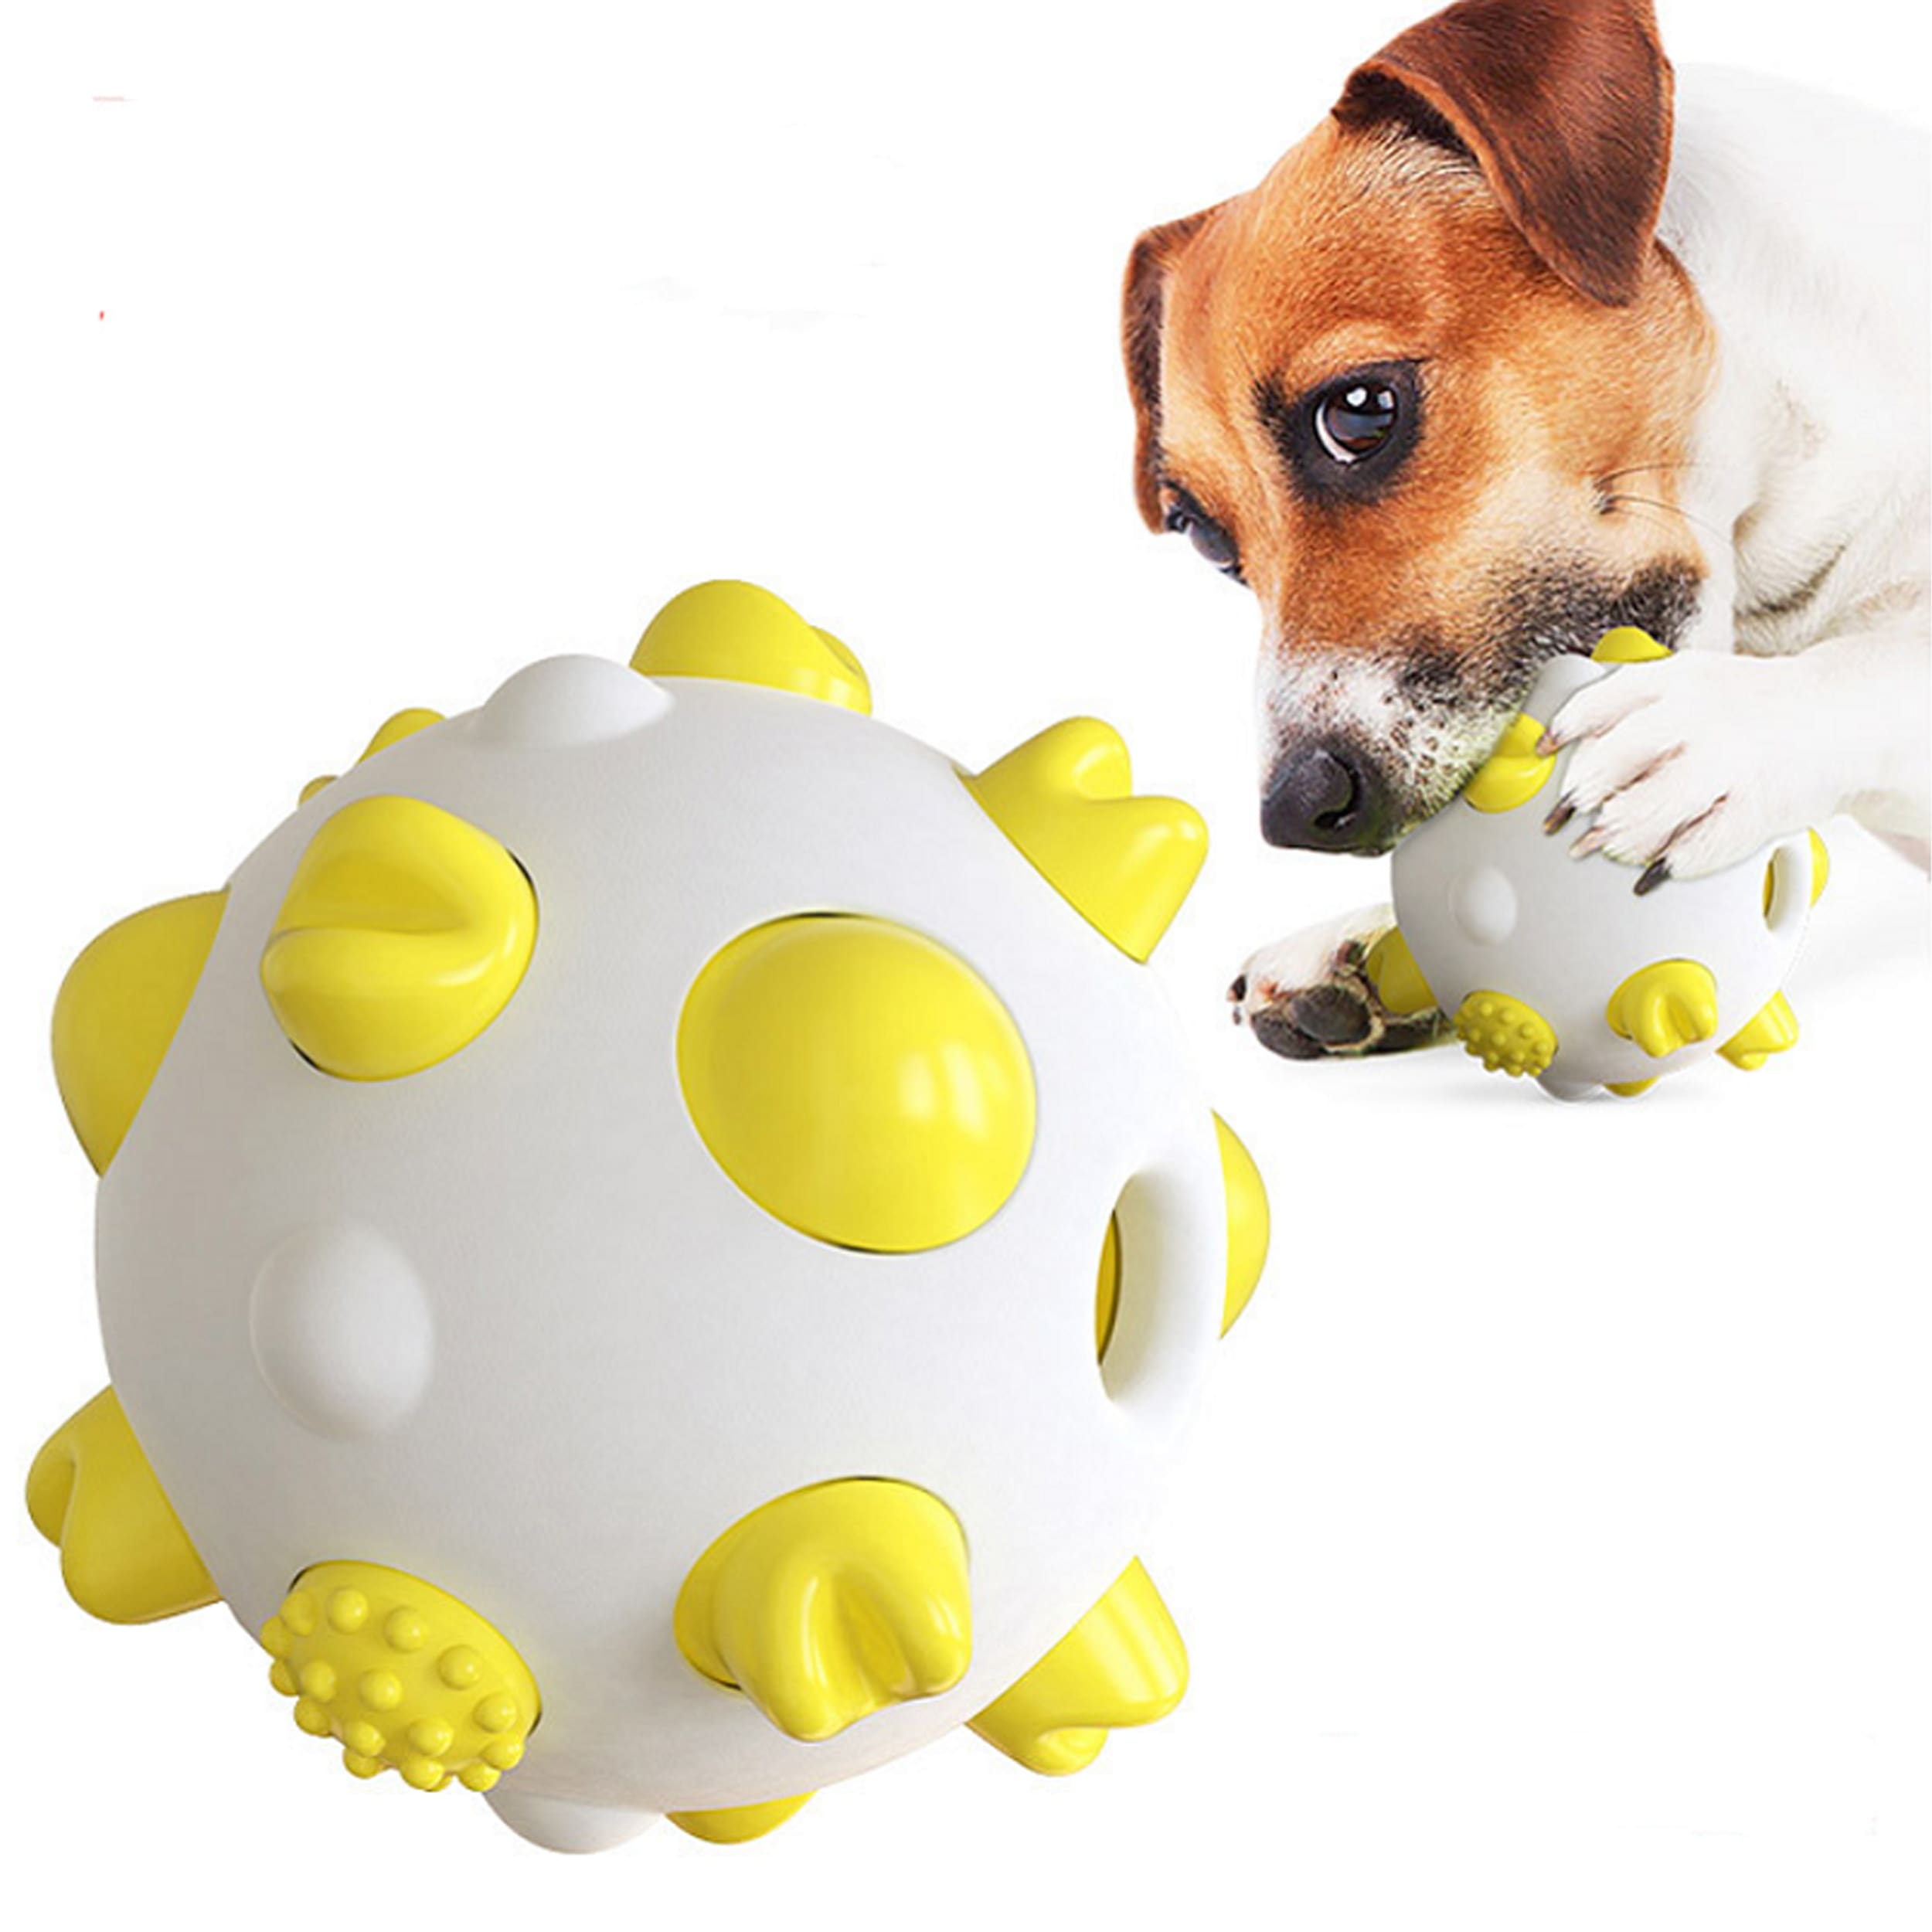 Keep Your Dog Active and Healthy With Interactive Spherical Shape Dog Toy